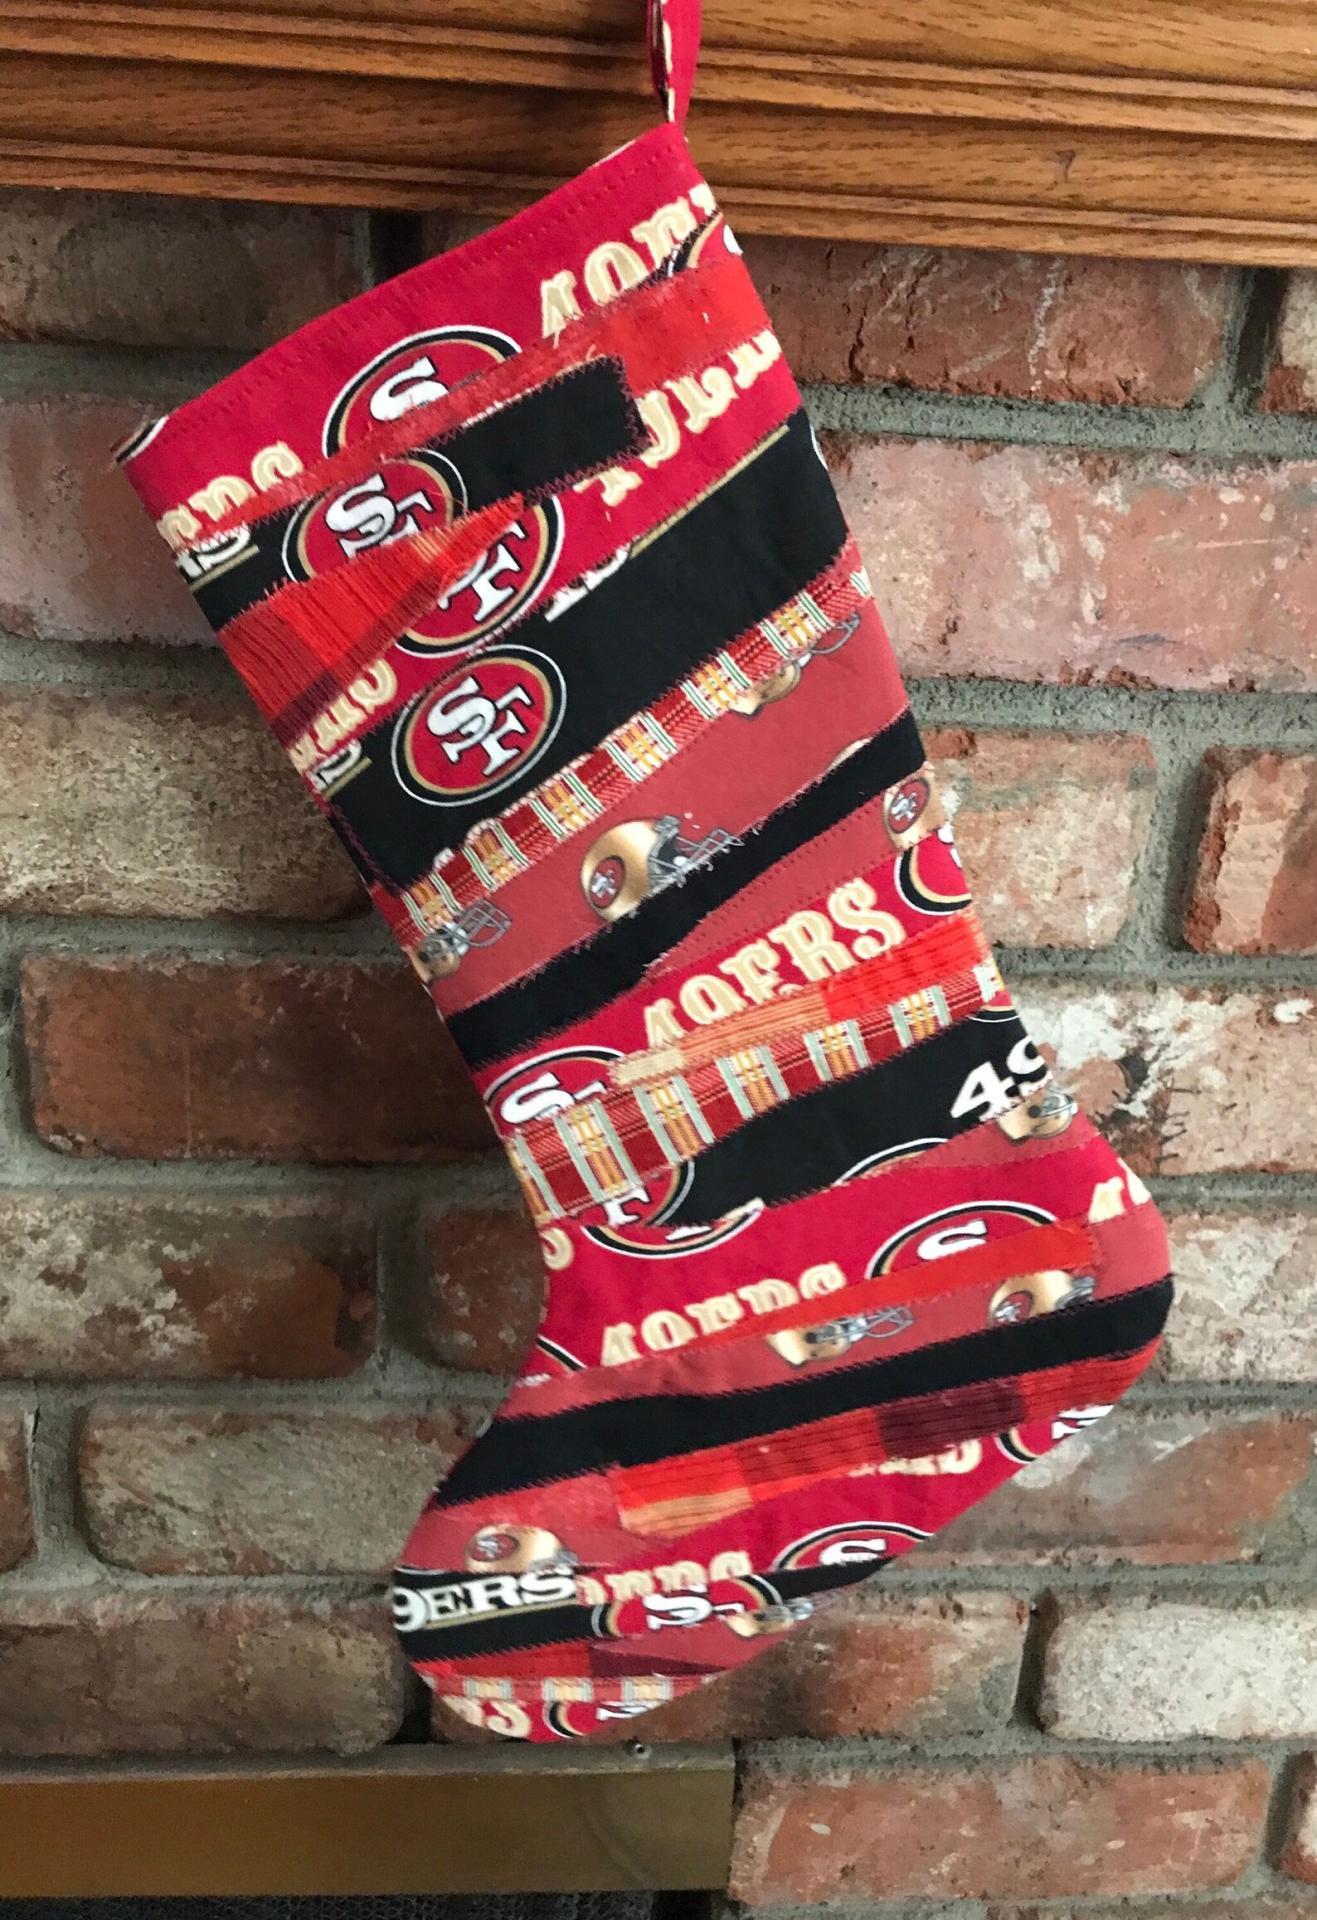 49ers Christmas stocking, scrappy / pieced, red black gold white